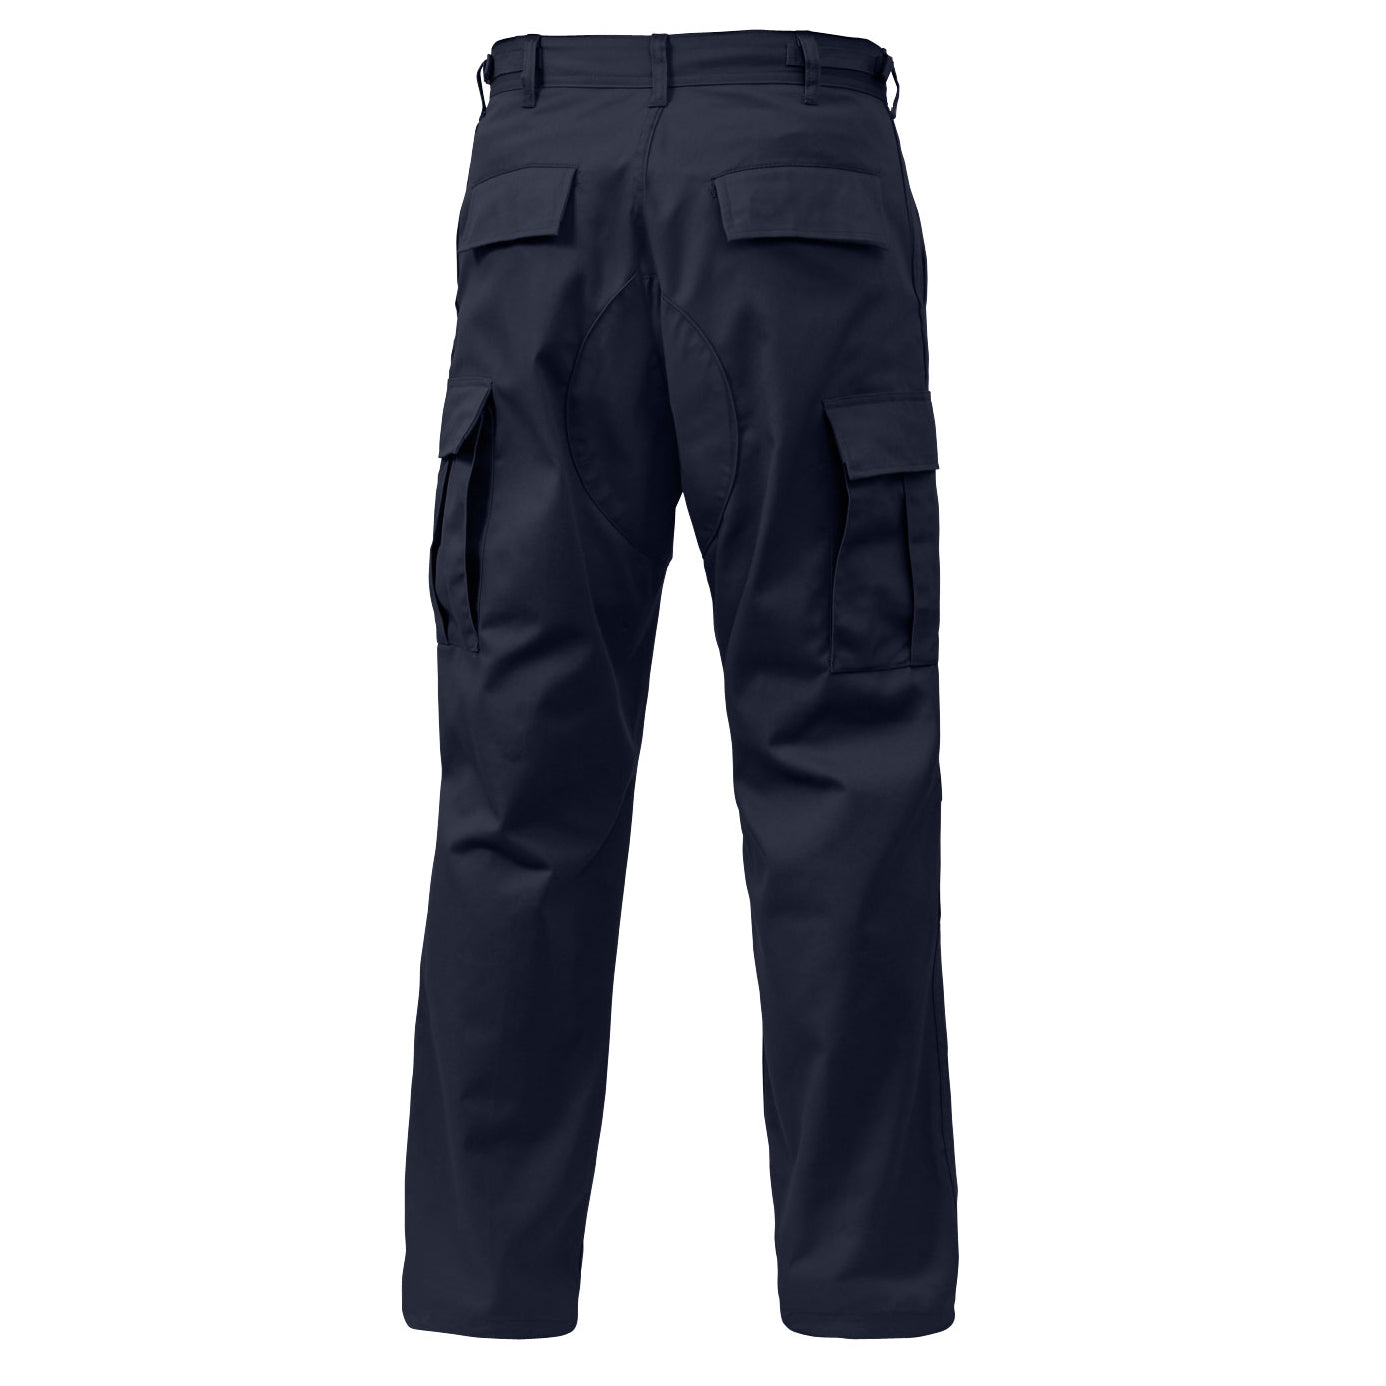 Bdu pants navy blue openland (opt-3337 06): Trousers for Softair | Titano  Store